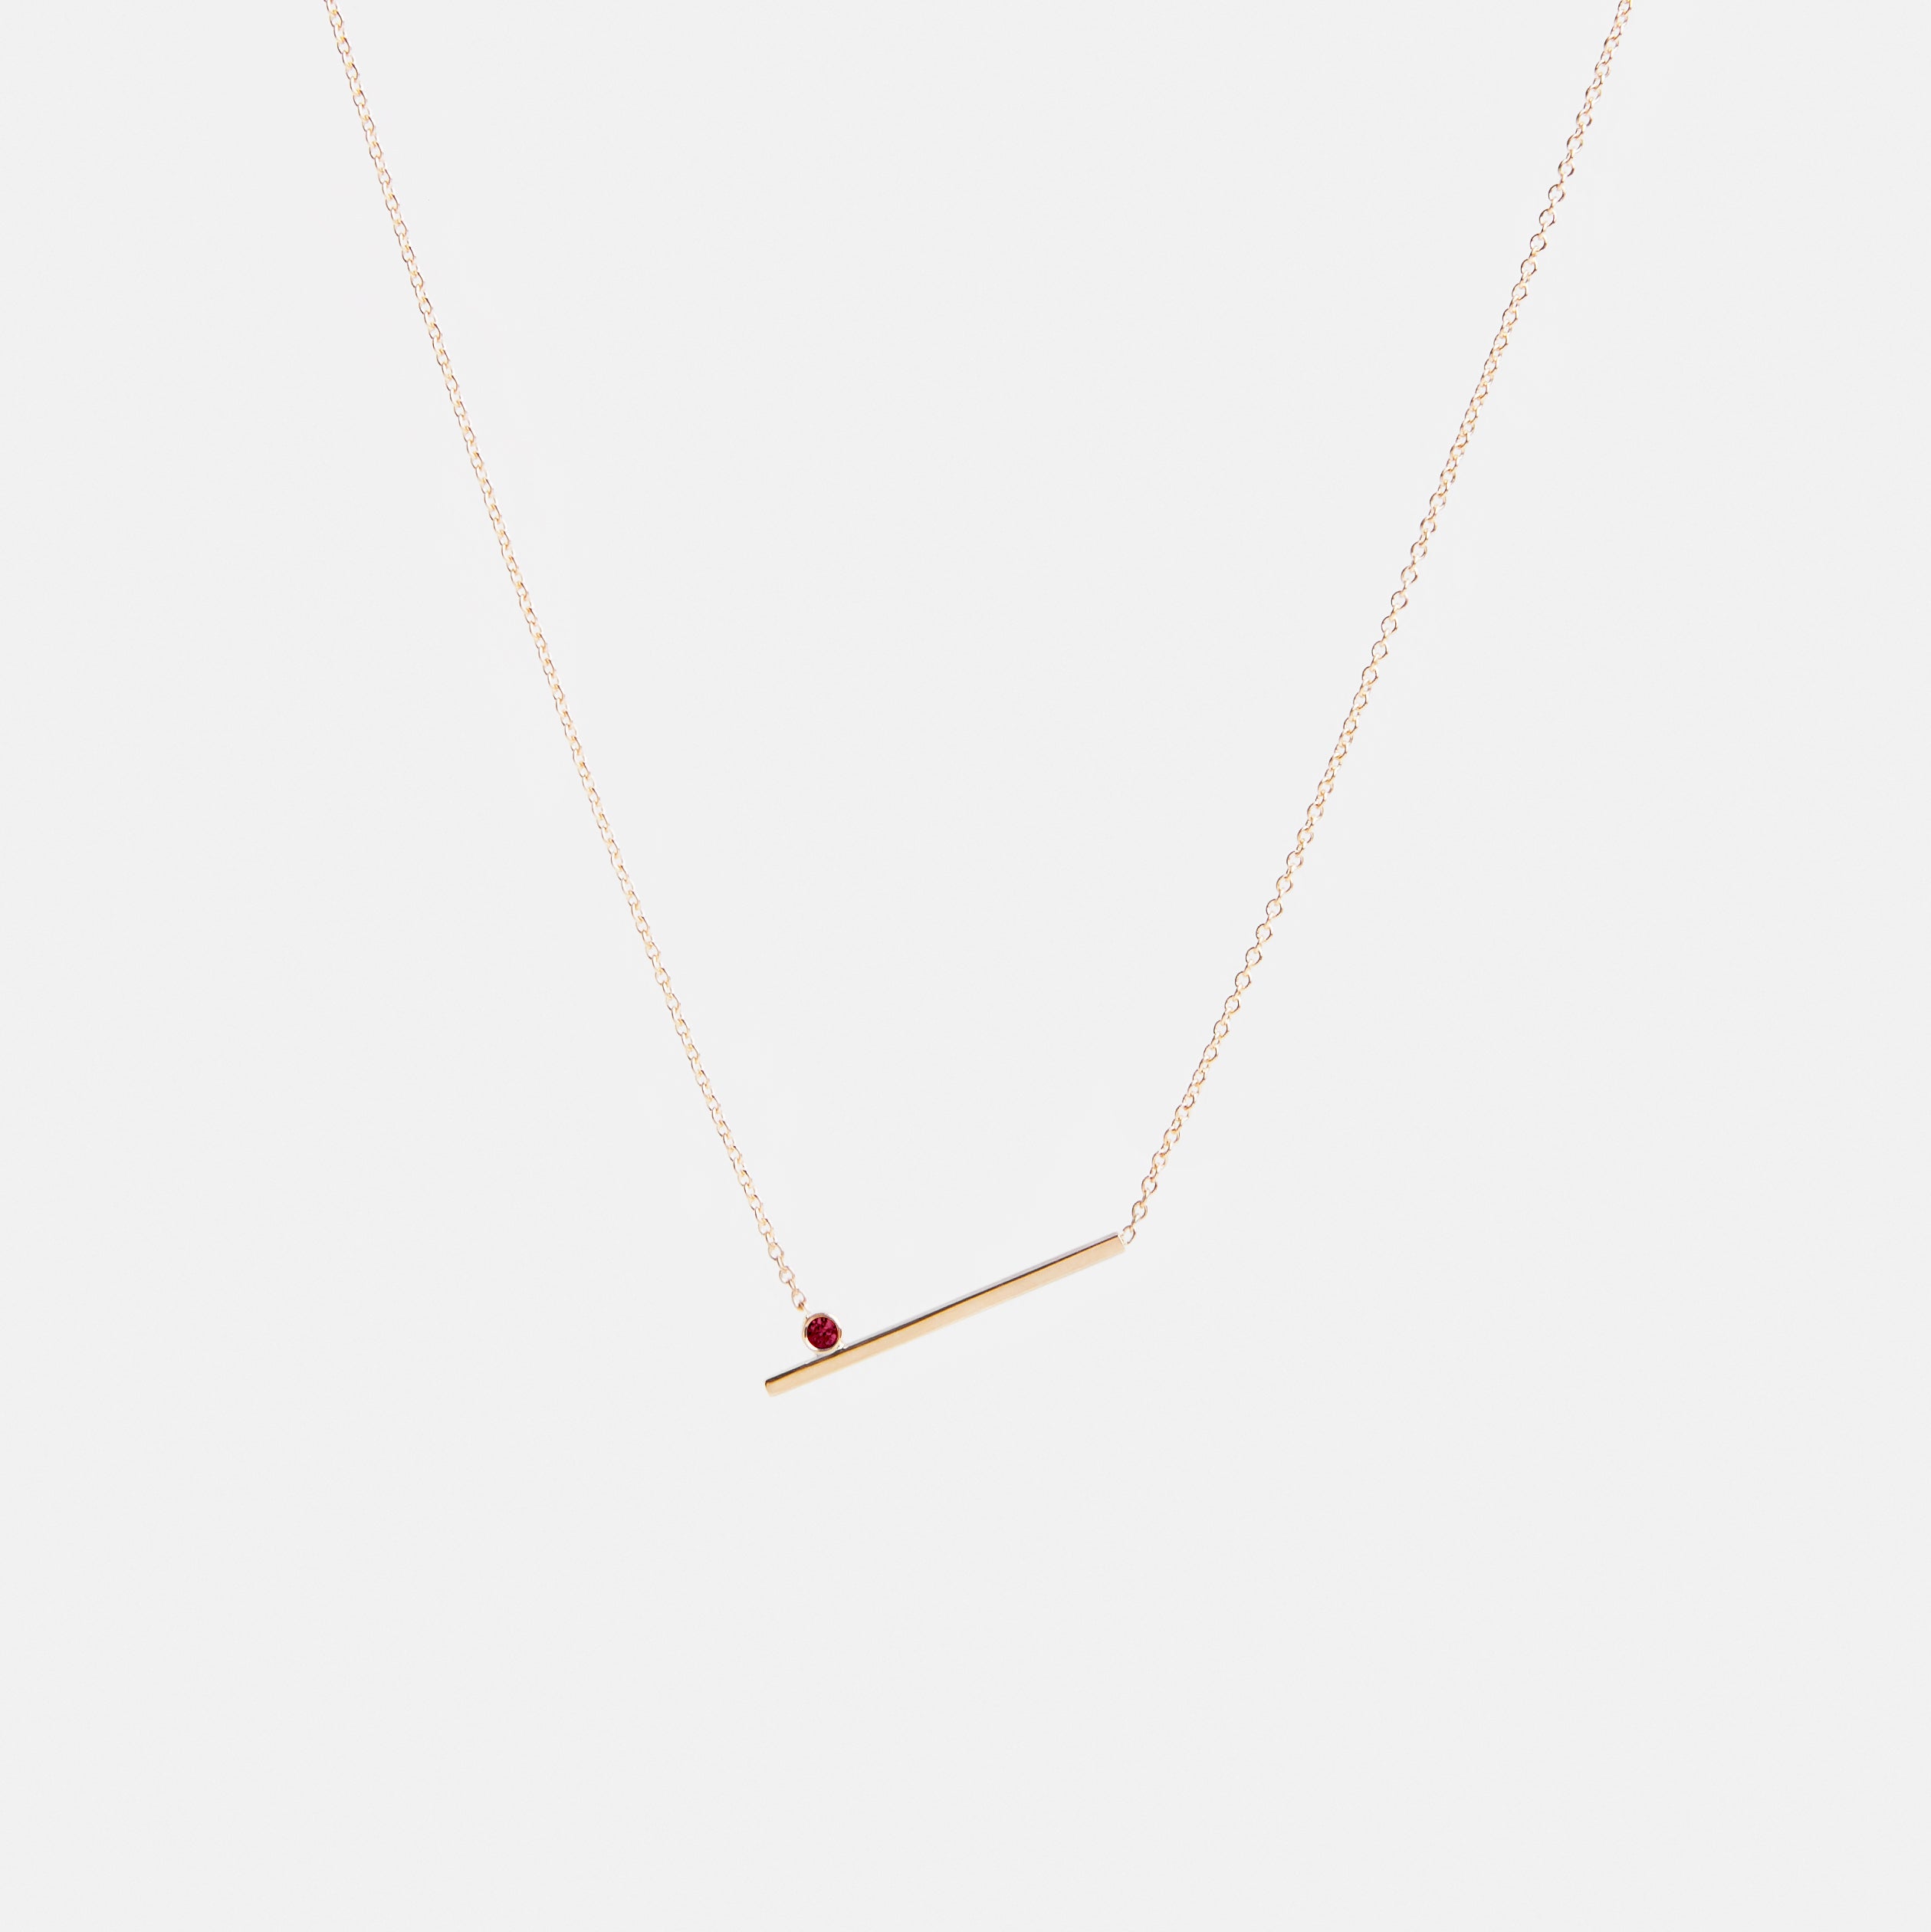 Livi Non-Traditional Necklace in 14k Gold Set with Ruby By SHW Fine Jewelry NYC